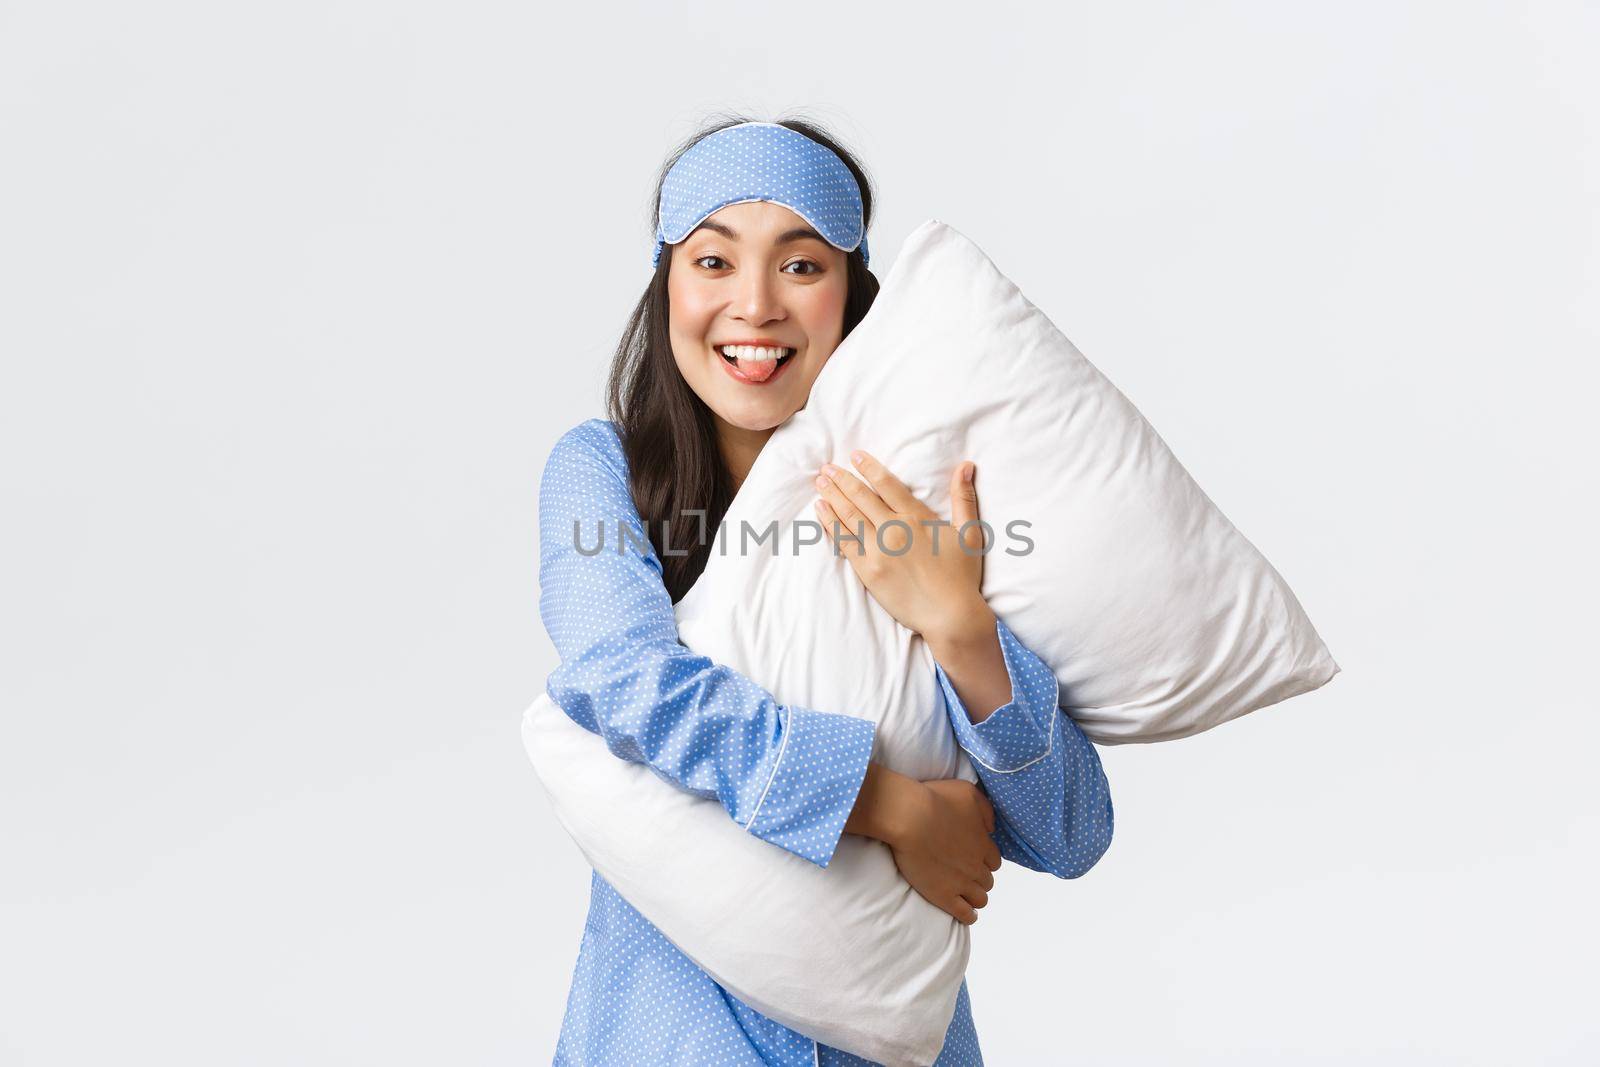 Funny and cute asian girl with happy smile, showing tongue as hugging pillow at sleepover party, wearing pajamas and sleeping mask, fooling around at bed over white background.